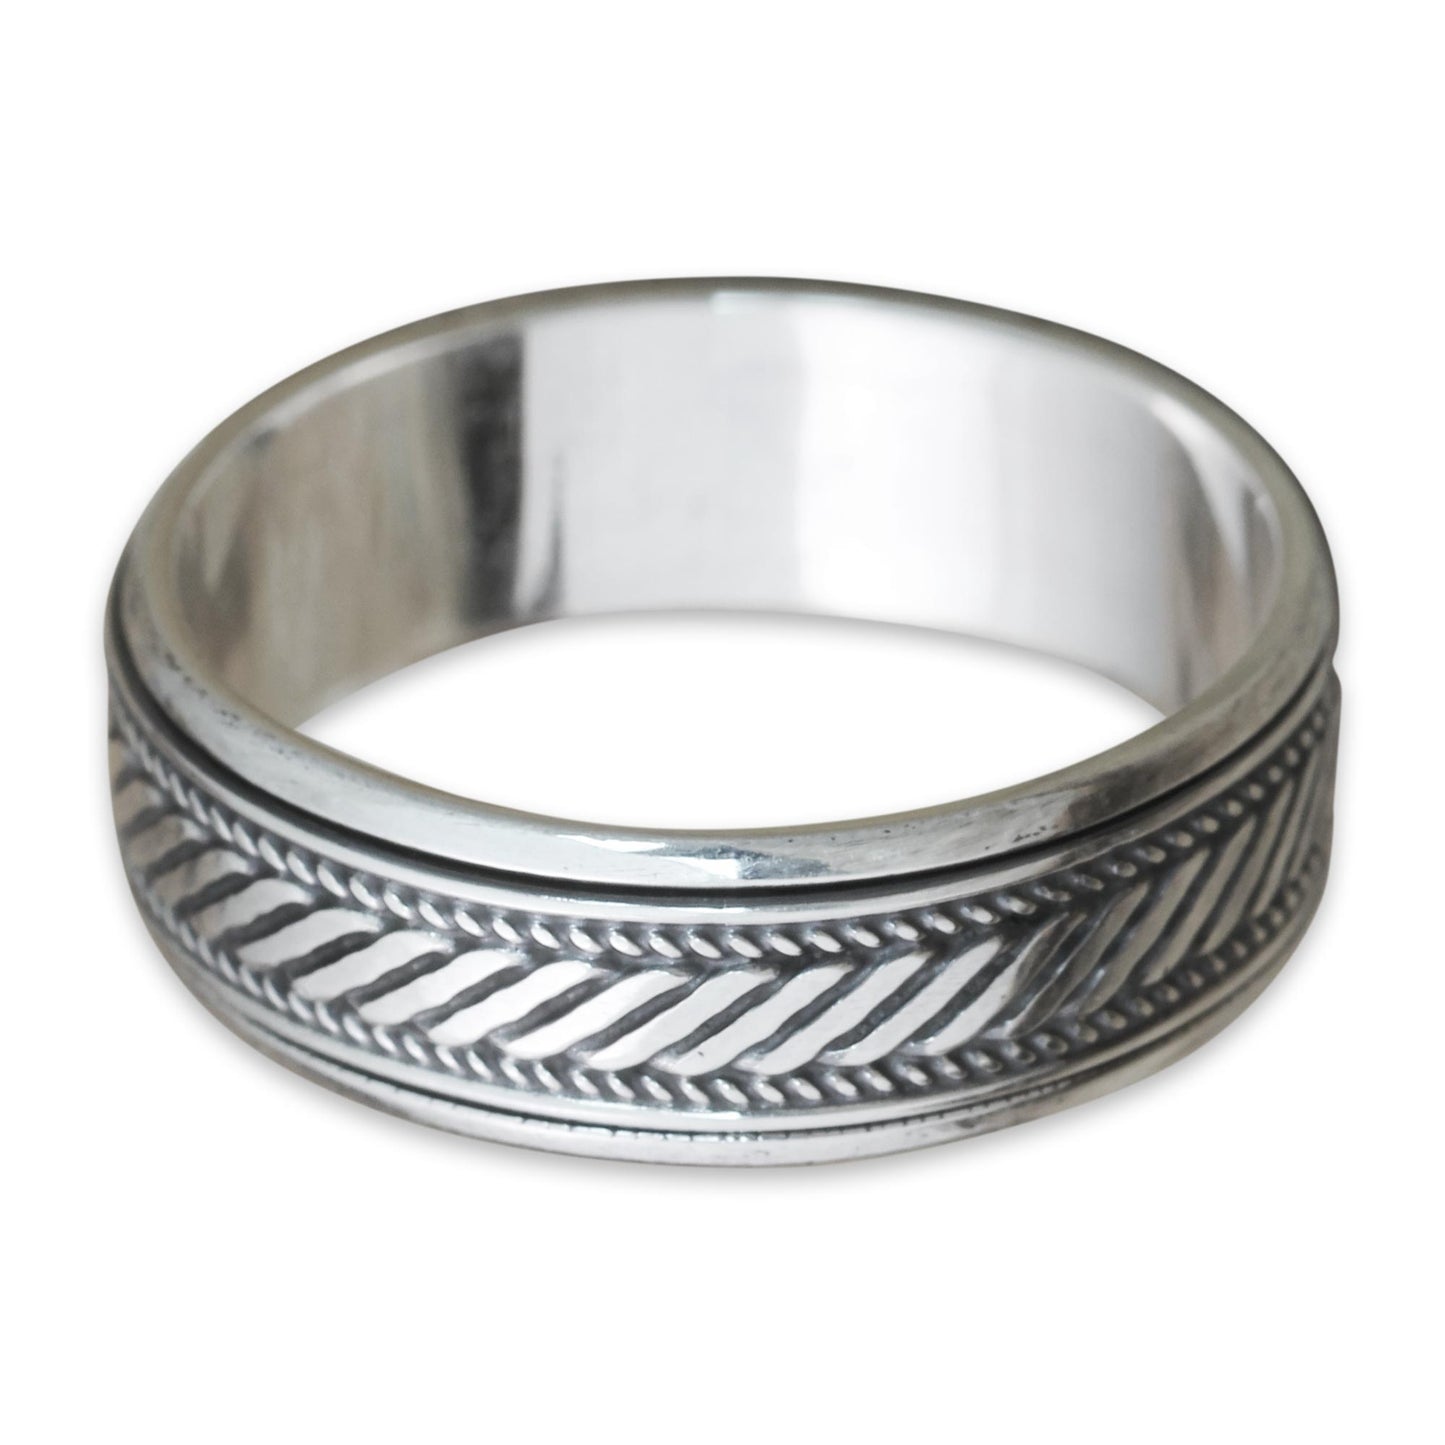 Speed Sterling Silver Handcrafted Spinner Ring